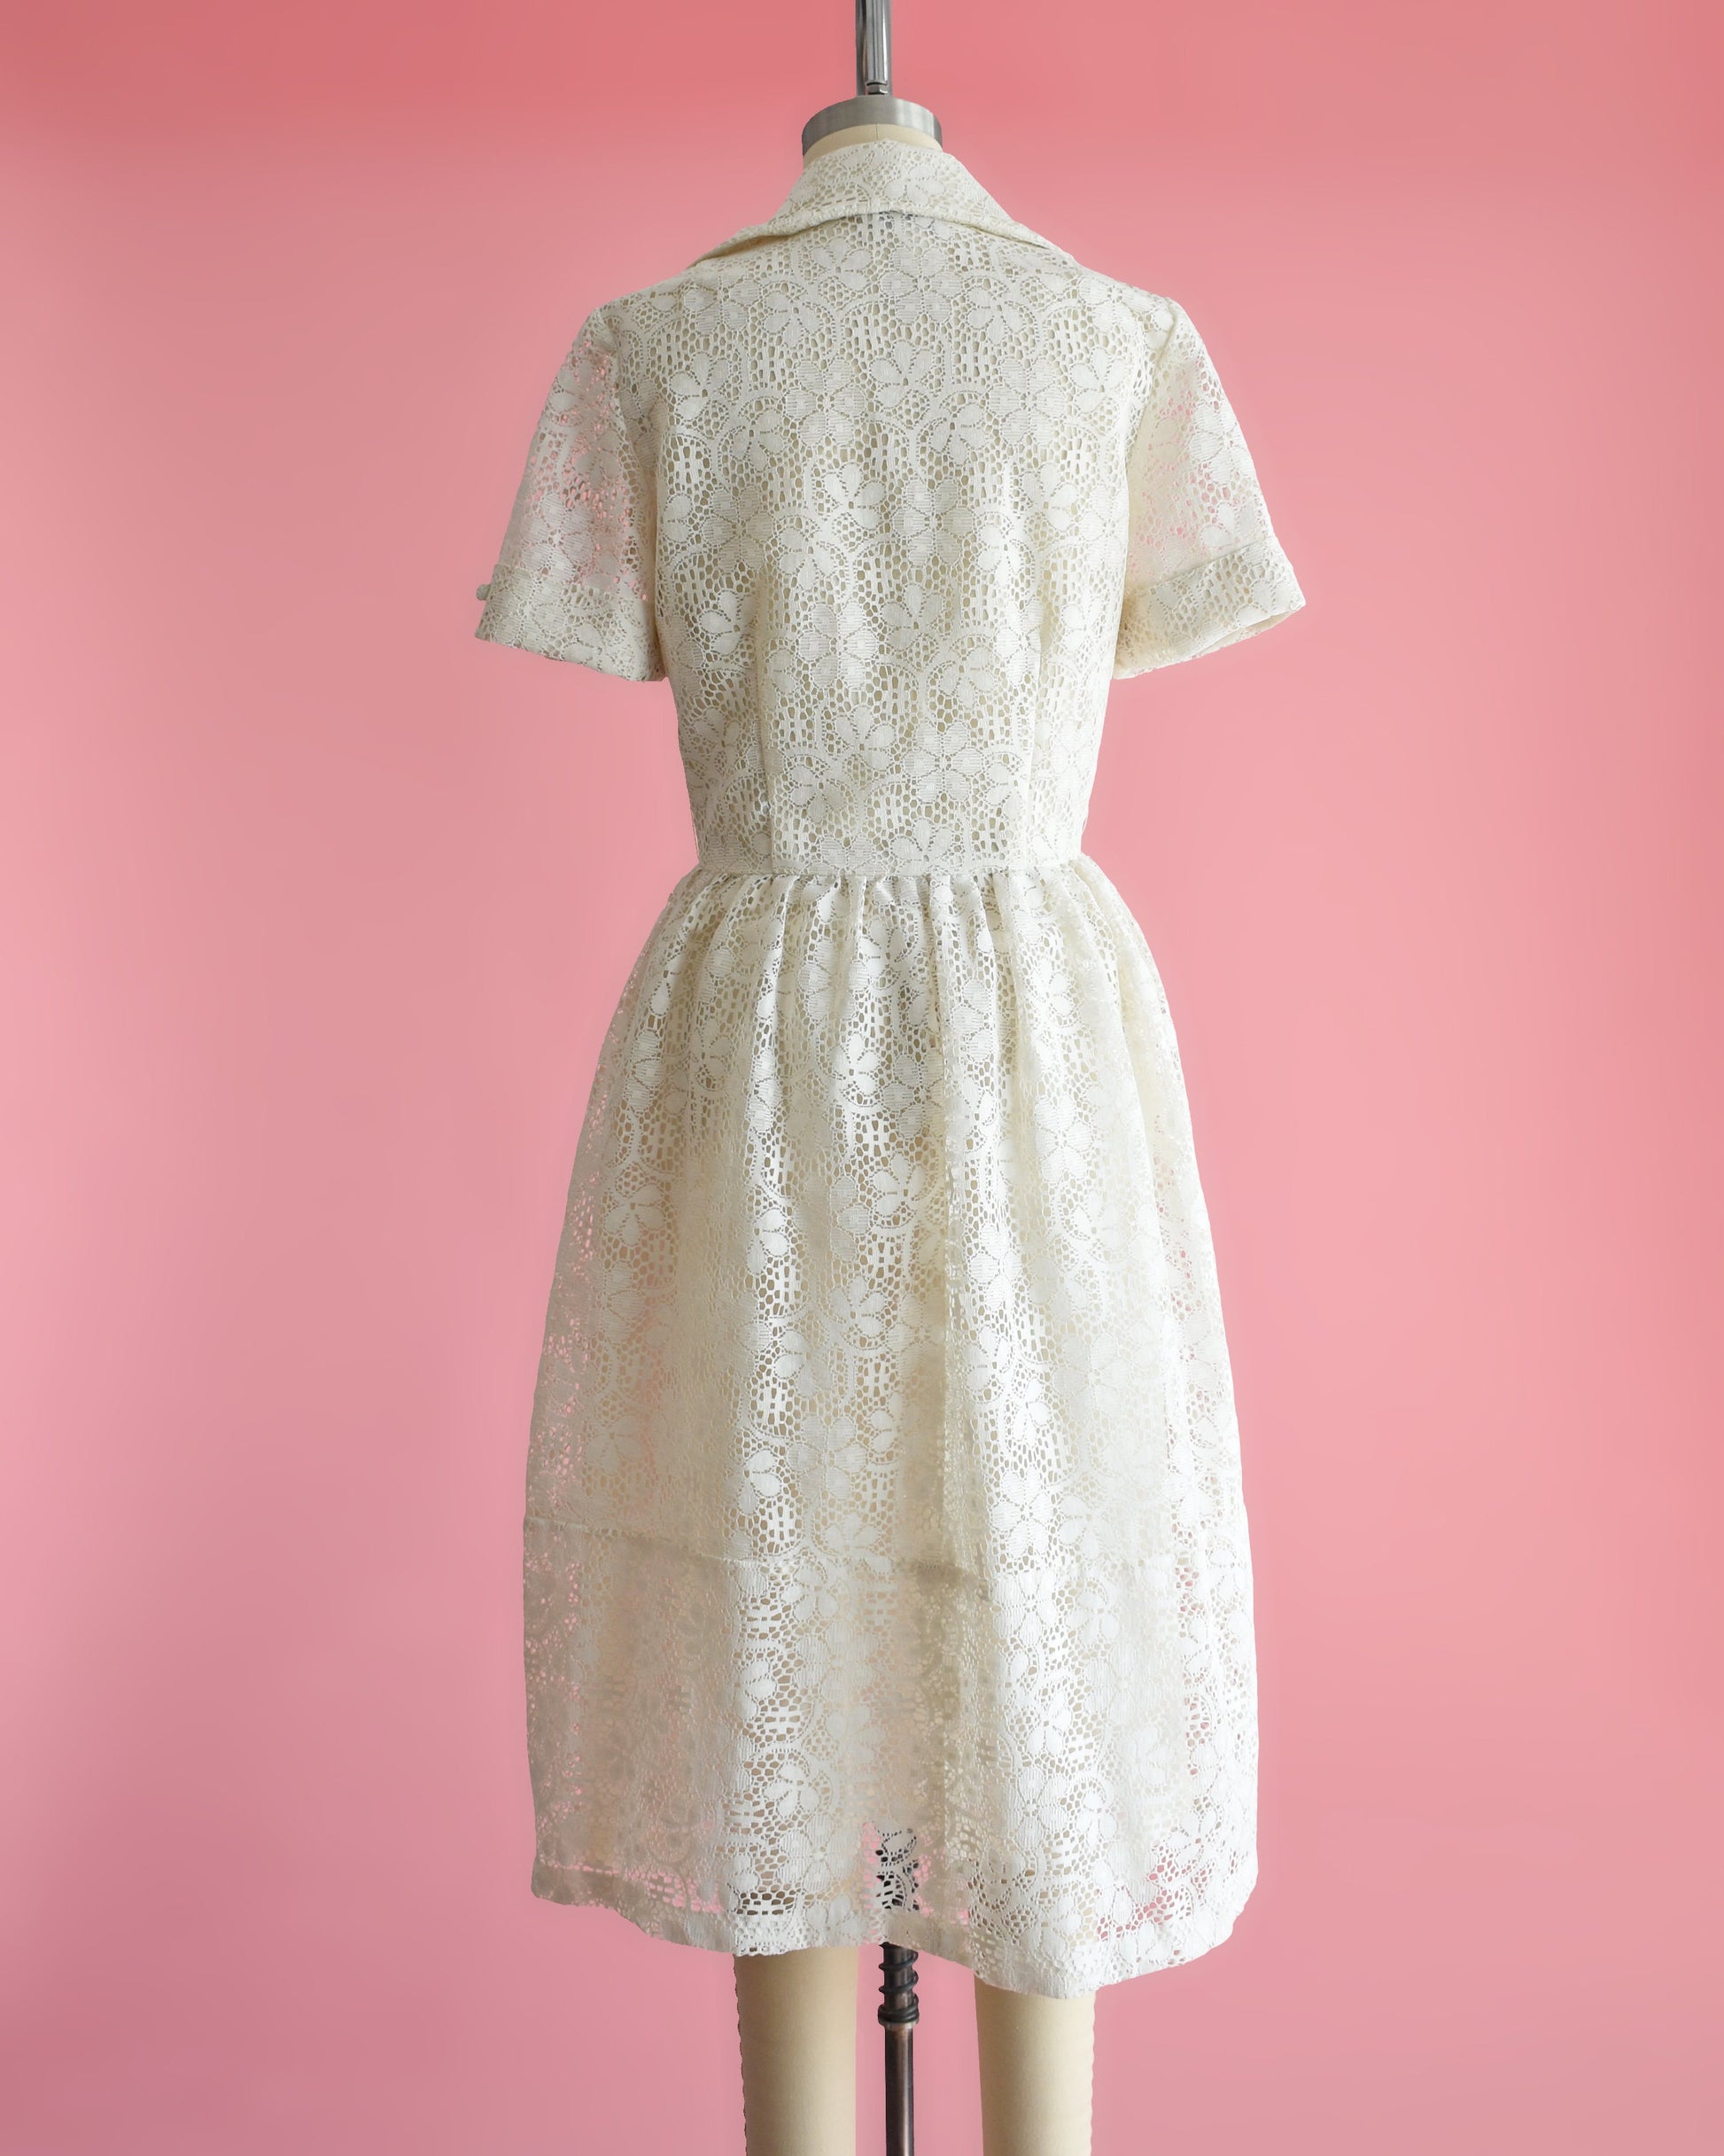 Back view of a A vintage cream floral lace dress with collared neckline and short sleeves on a dress form set on a pink background